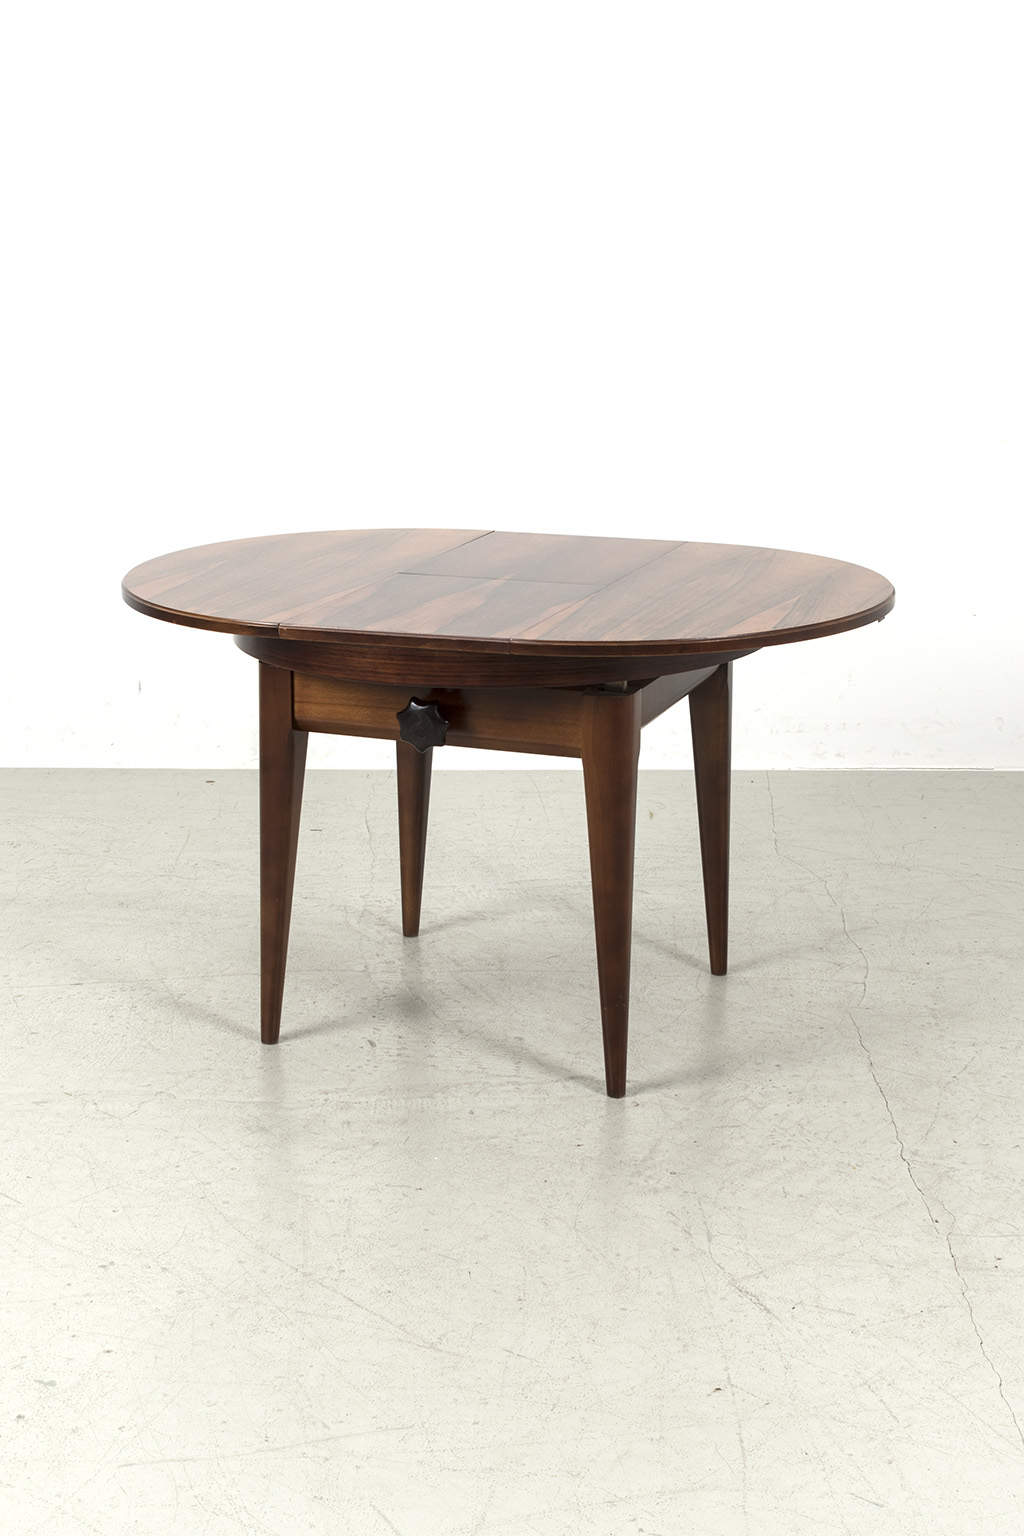 Vintage rosewood extendable table